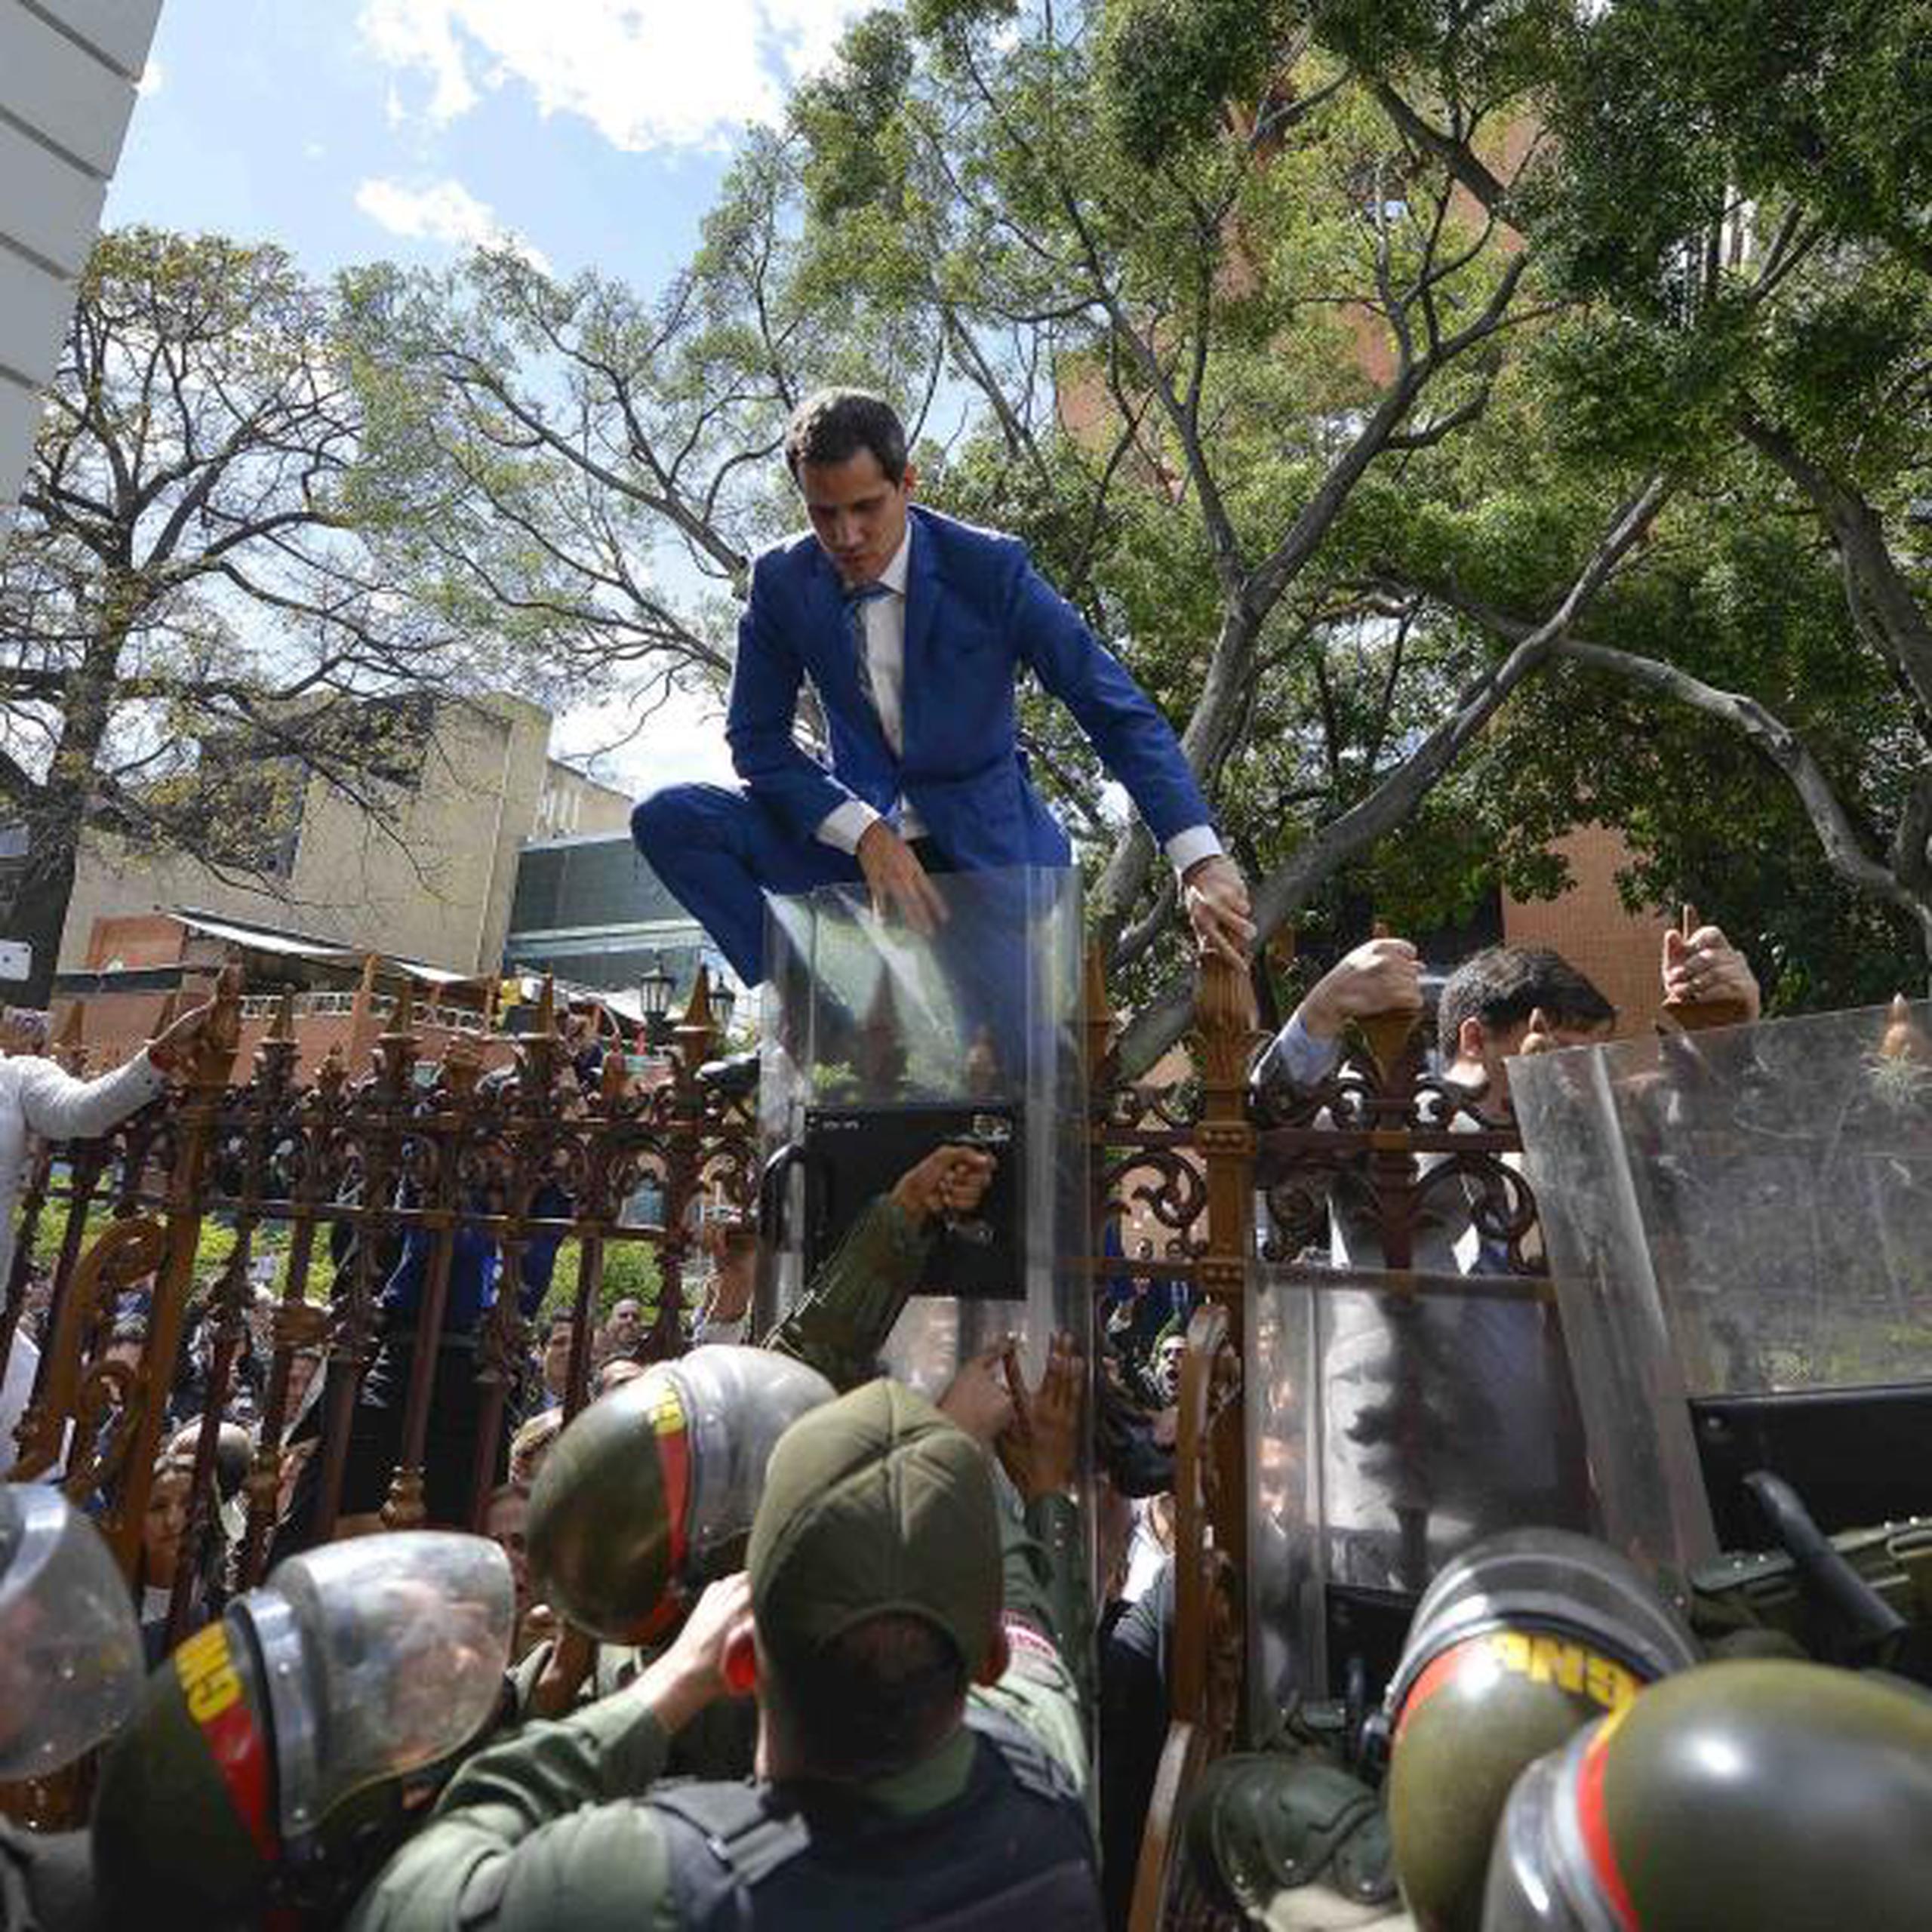 National Assembly President Juan Guaido, Venezuela's opposition leader, tries to climb the fence to enter the compound of the Assembly, after he and other opposition lawmakers were blocked by police from entering a session to elect new Assembly leadership in Caracas, Venezuela, Sunday, Jan. 5, 2020. With Guaido stuck outside, a rival slate headed by lawmaker Luis Parra swore themselves in as leaders of the single-chamber legislature. (AP Photo/Matias Delacroix)